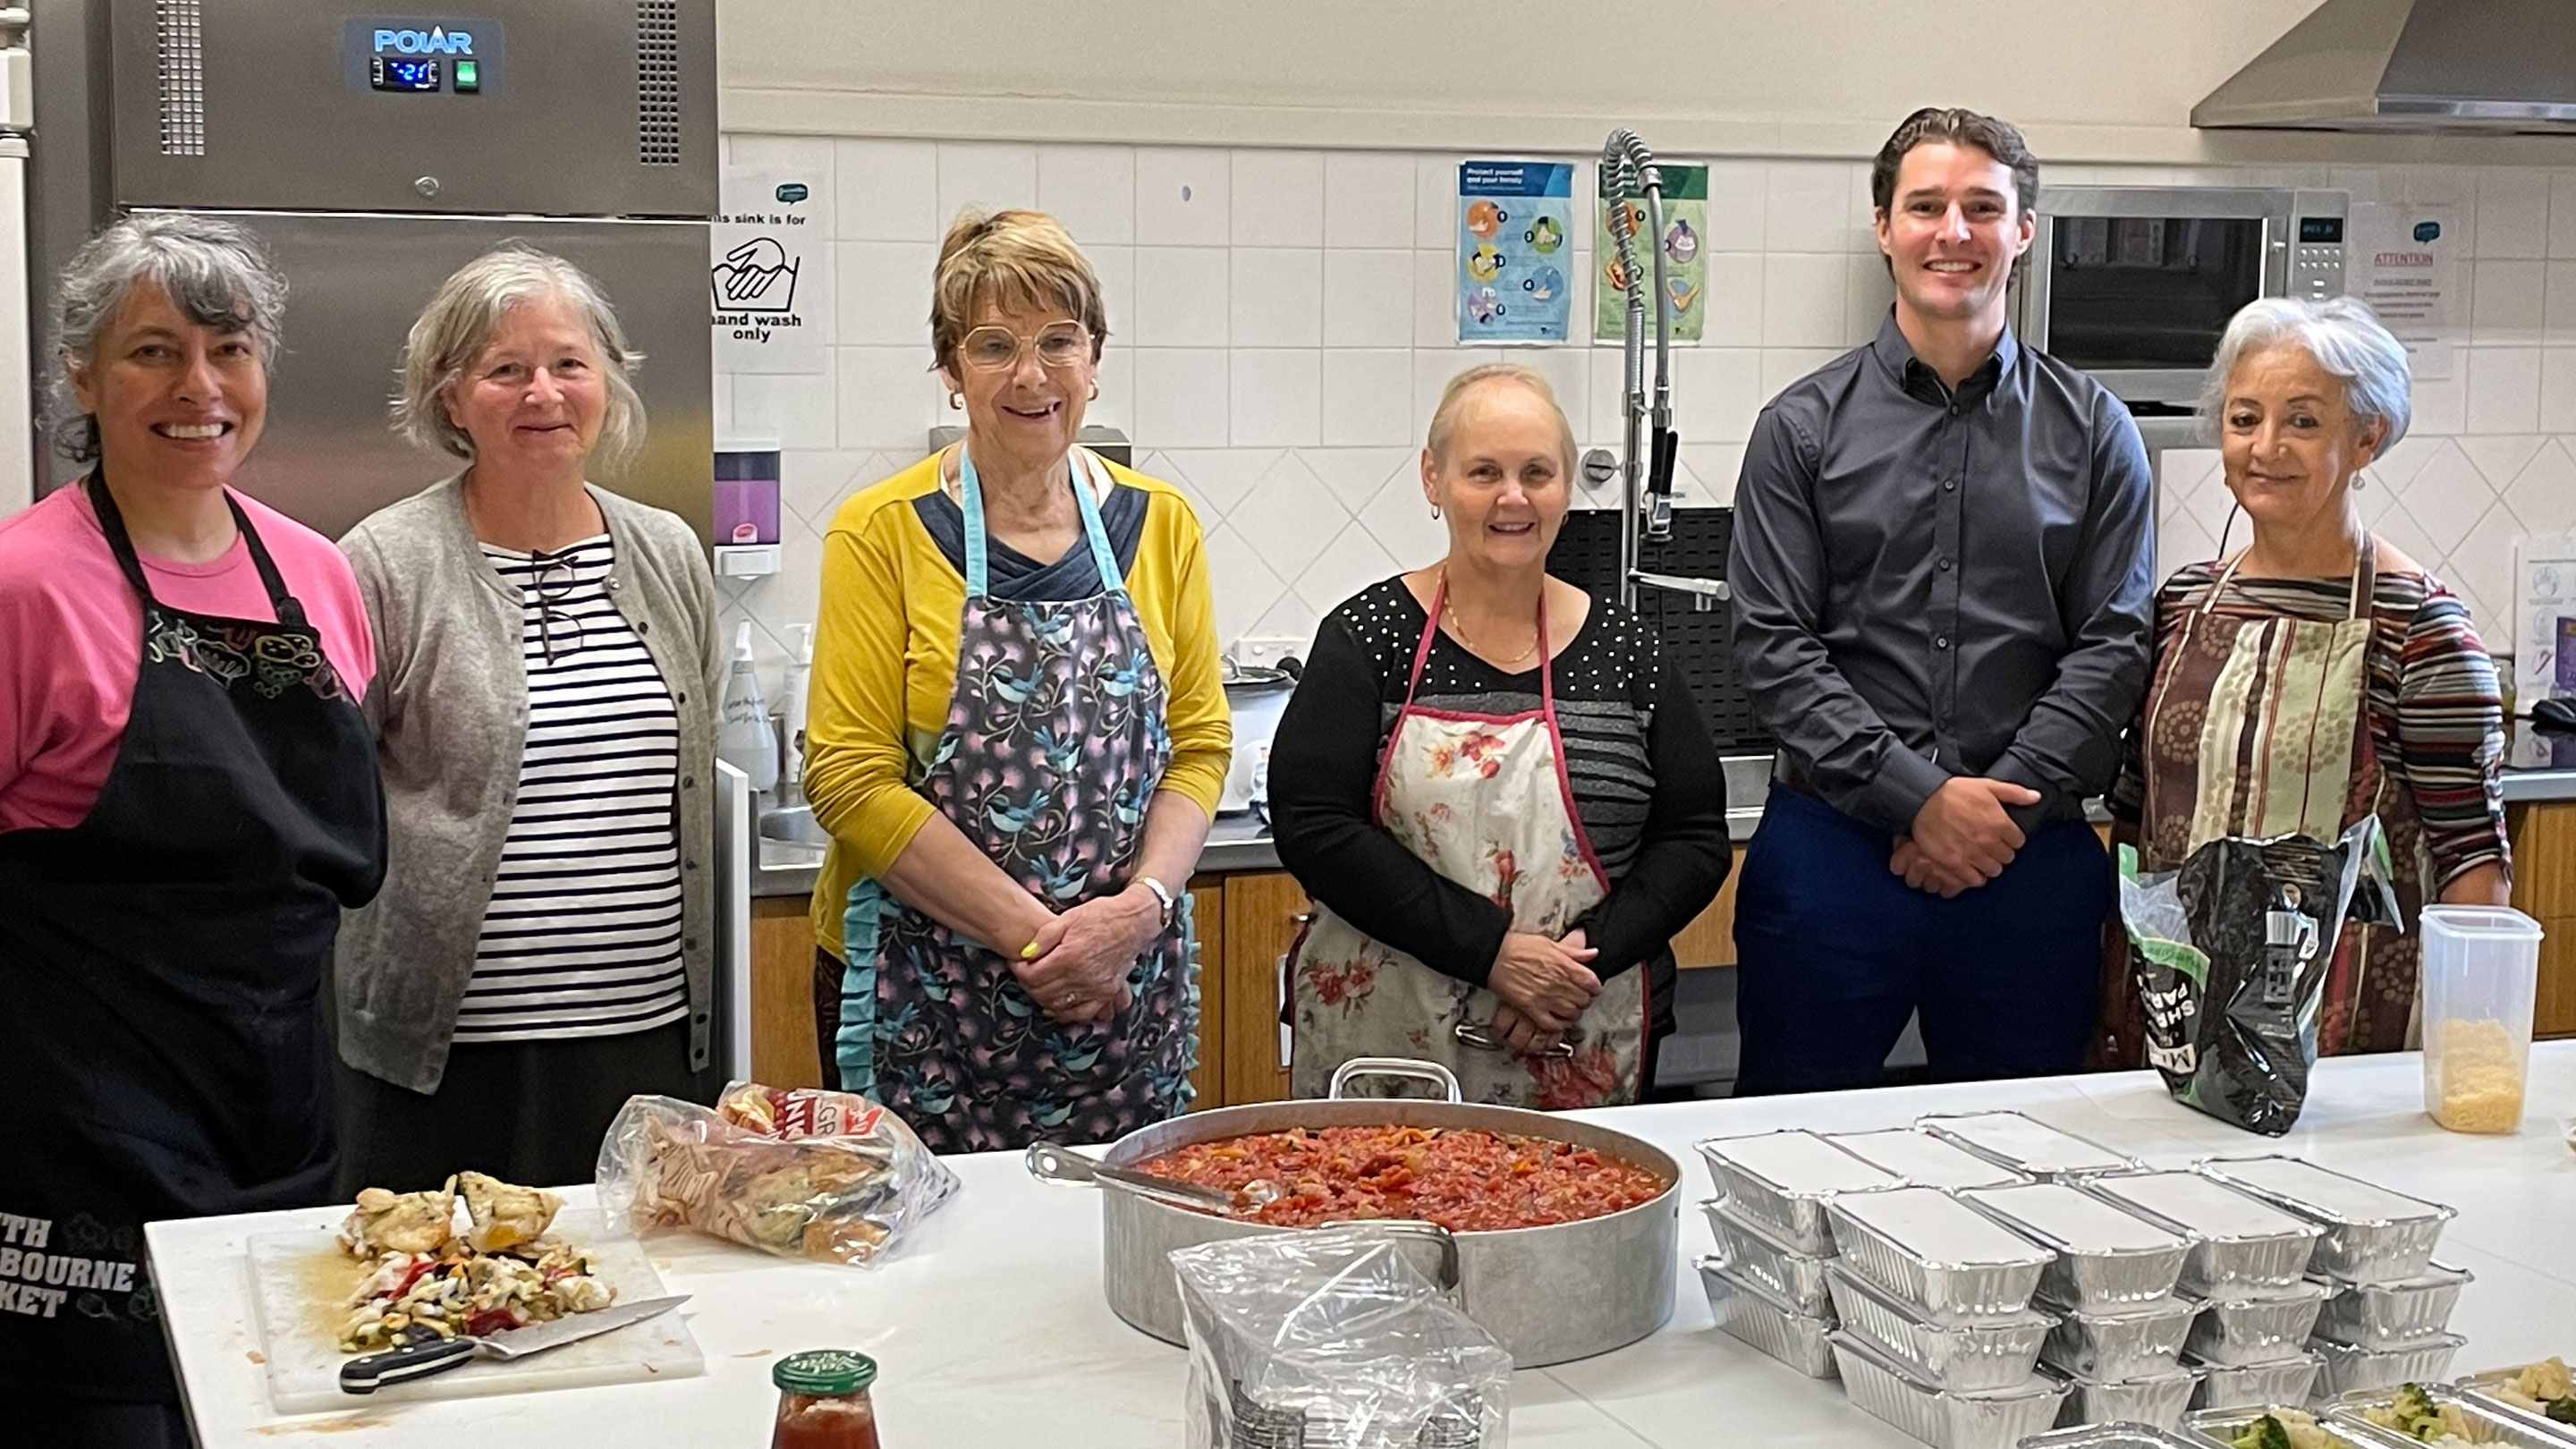 Image Yarraville’s Assistant Terminal Manager, David Barker, visits the kitchen team preparing meals for the Nourish Project at YCC.